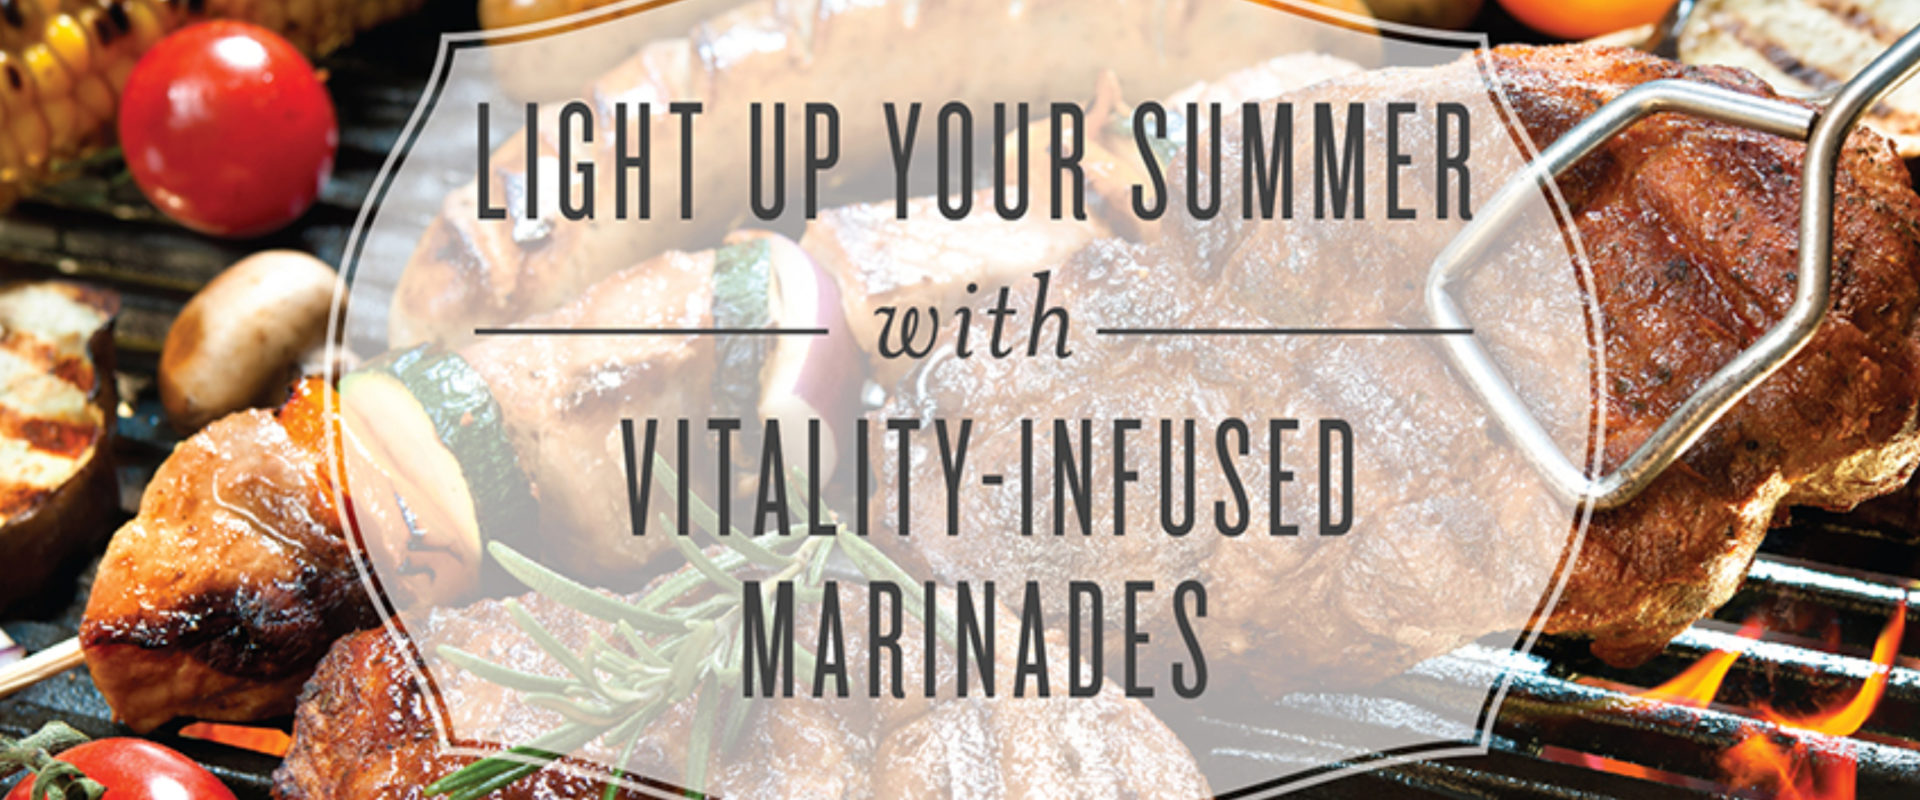 Grilling & Marinades with Vitality